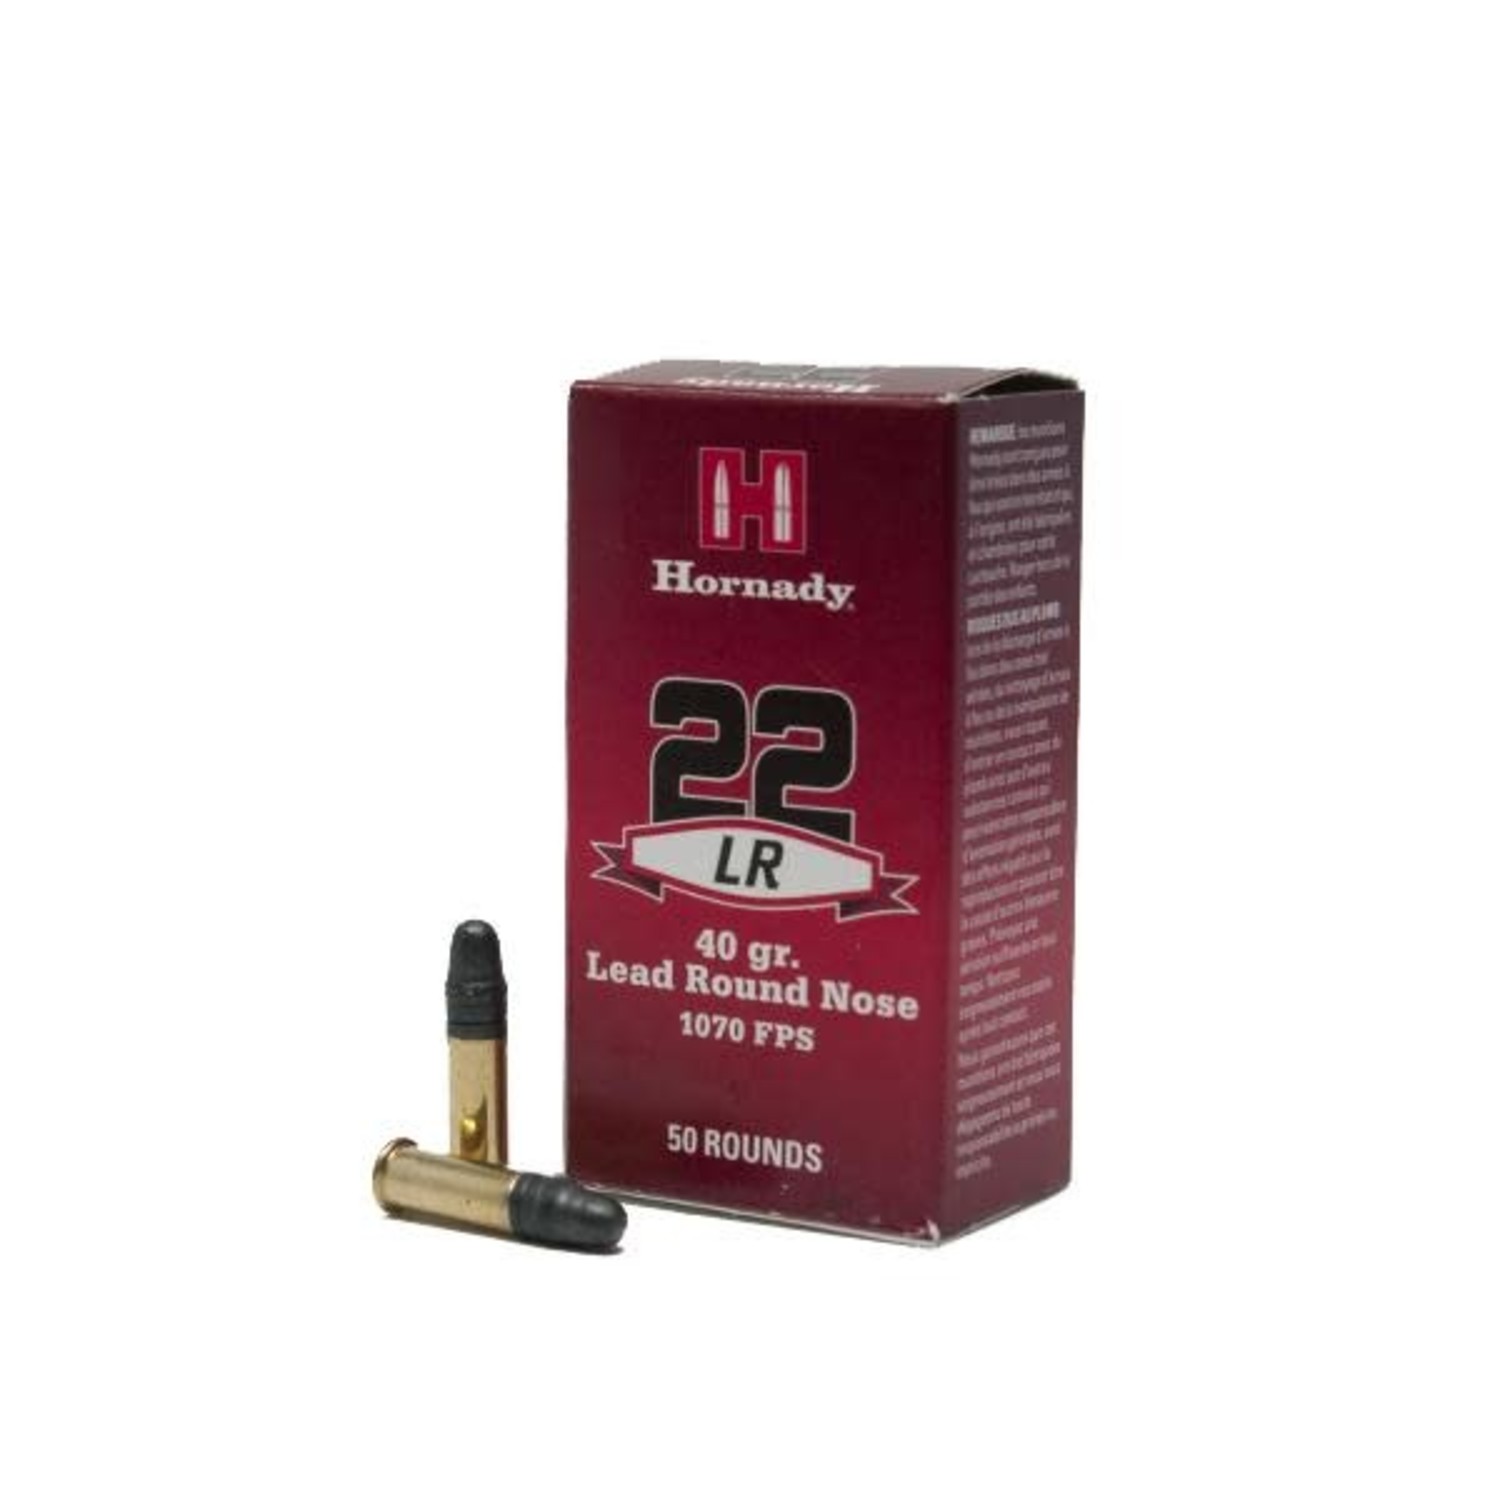 Cartridge Cases - Hornady Manufacturing, Inc